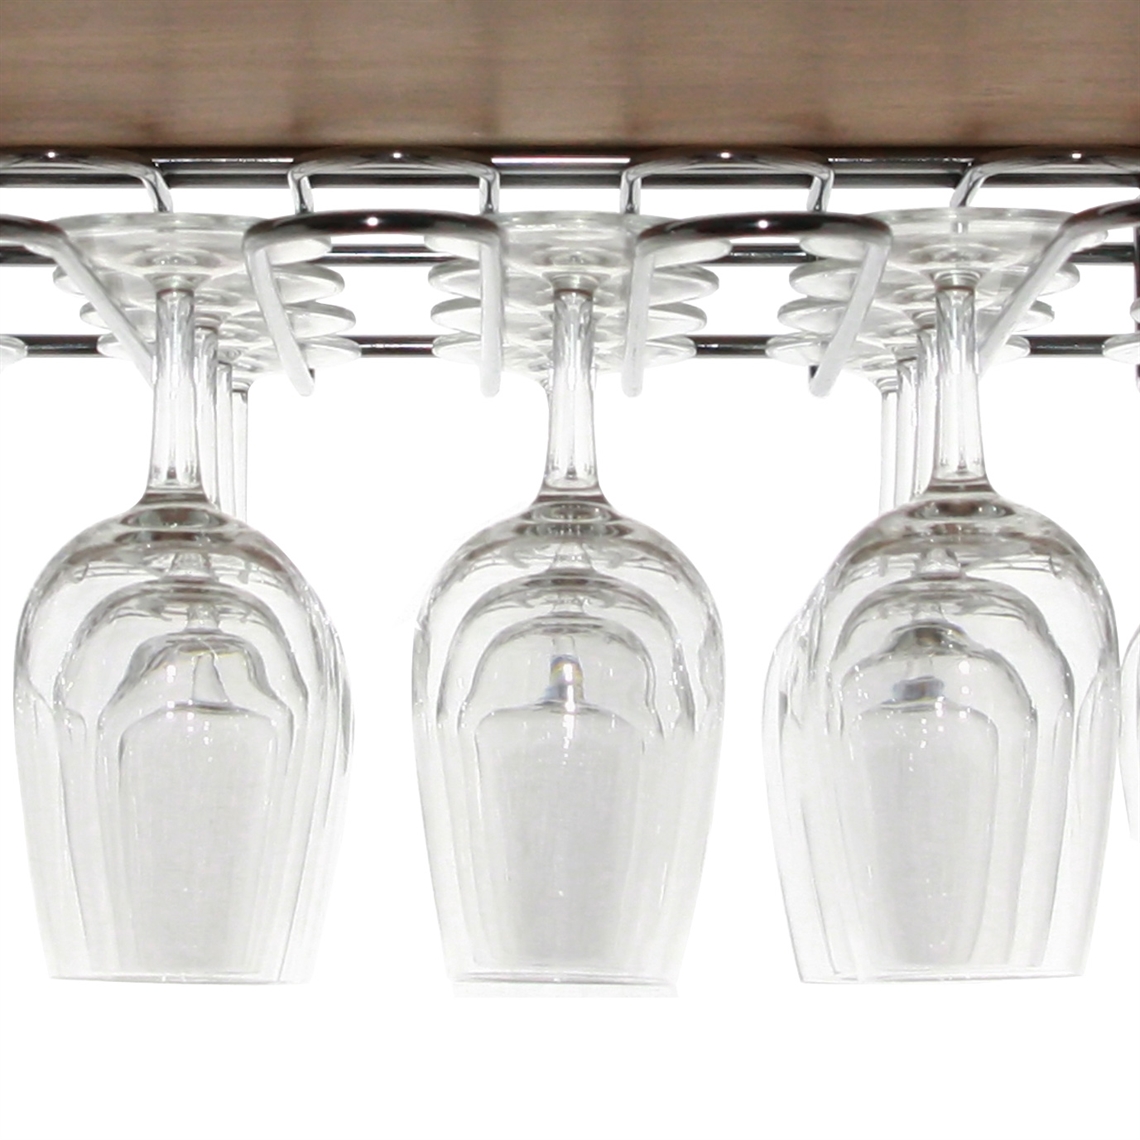 View more spirit and wine bar thimble measures from our Wine Glass Hanging Racks range